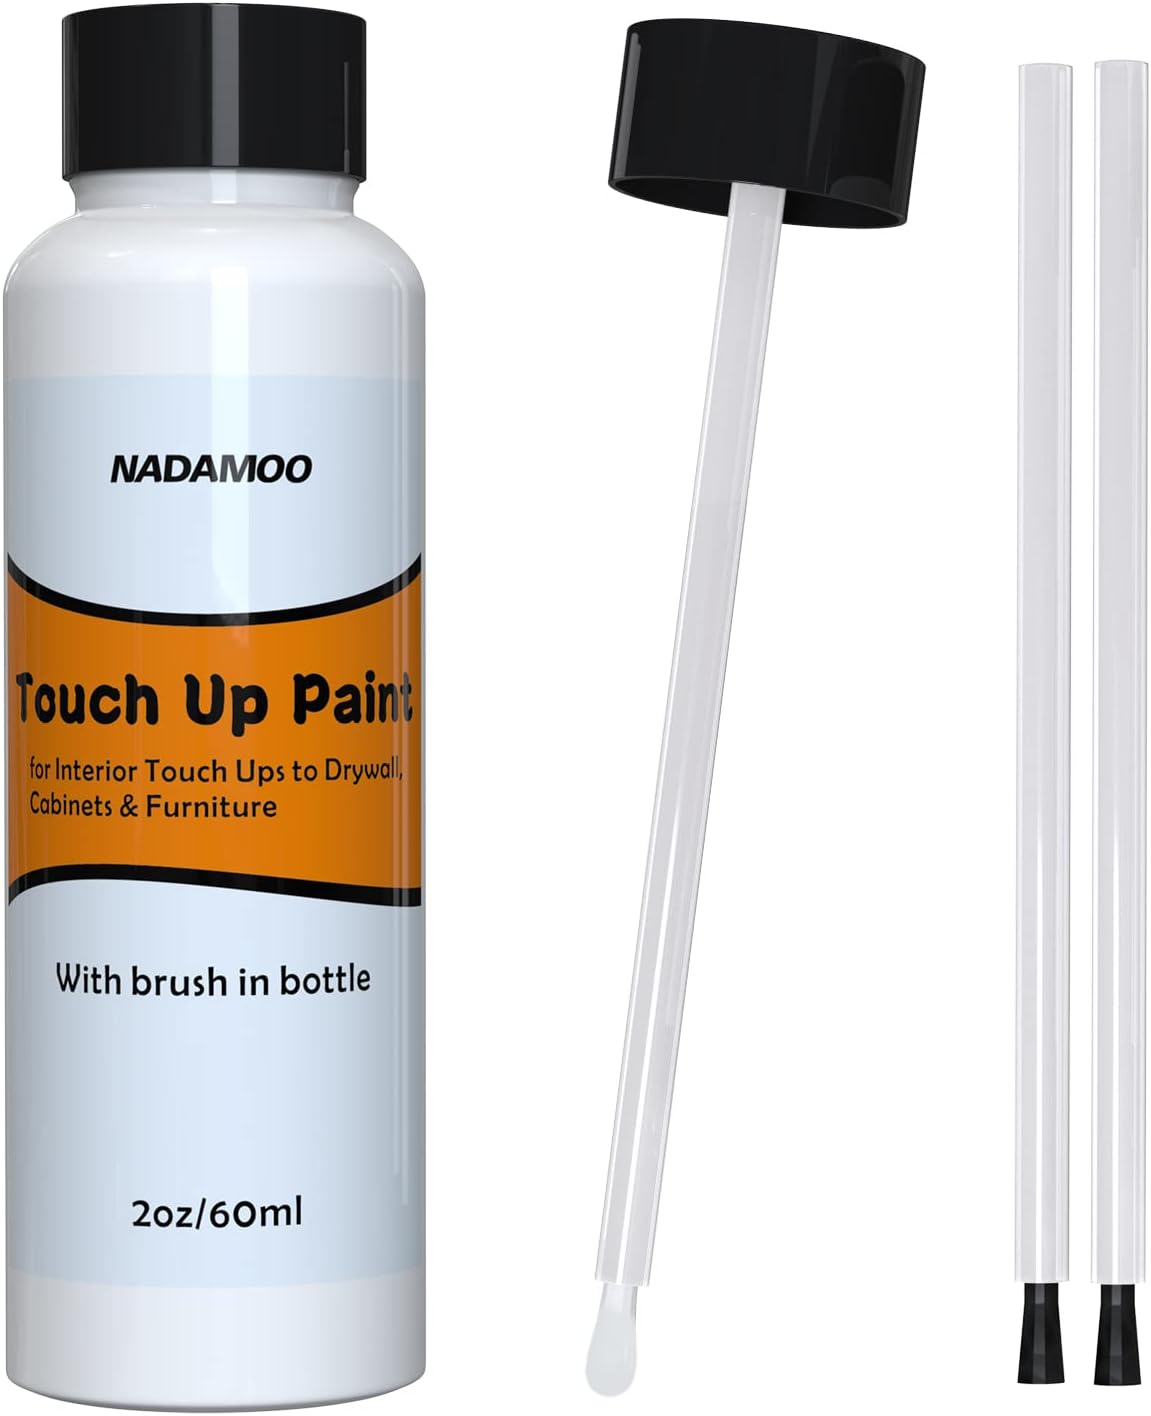 NADAMOO Multi Surface Touch Up Paint White, Interior [...]